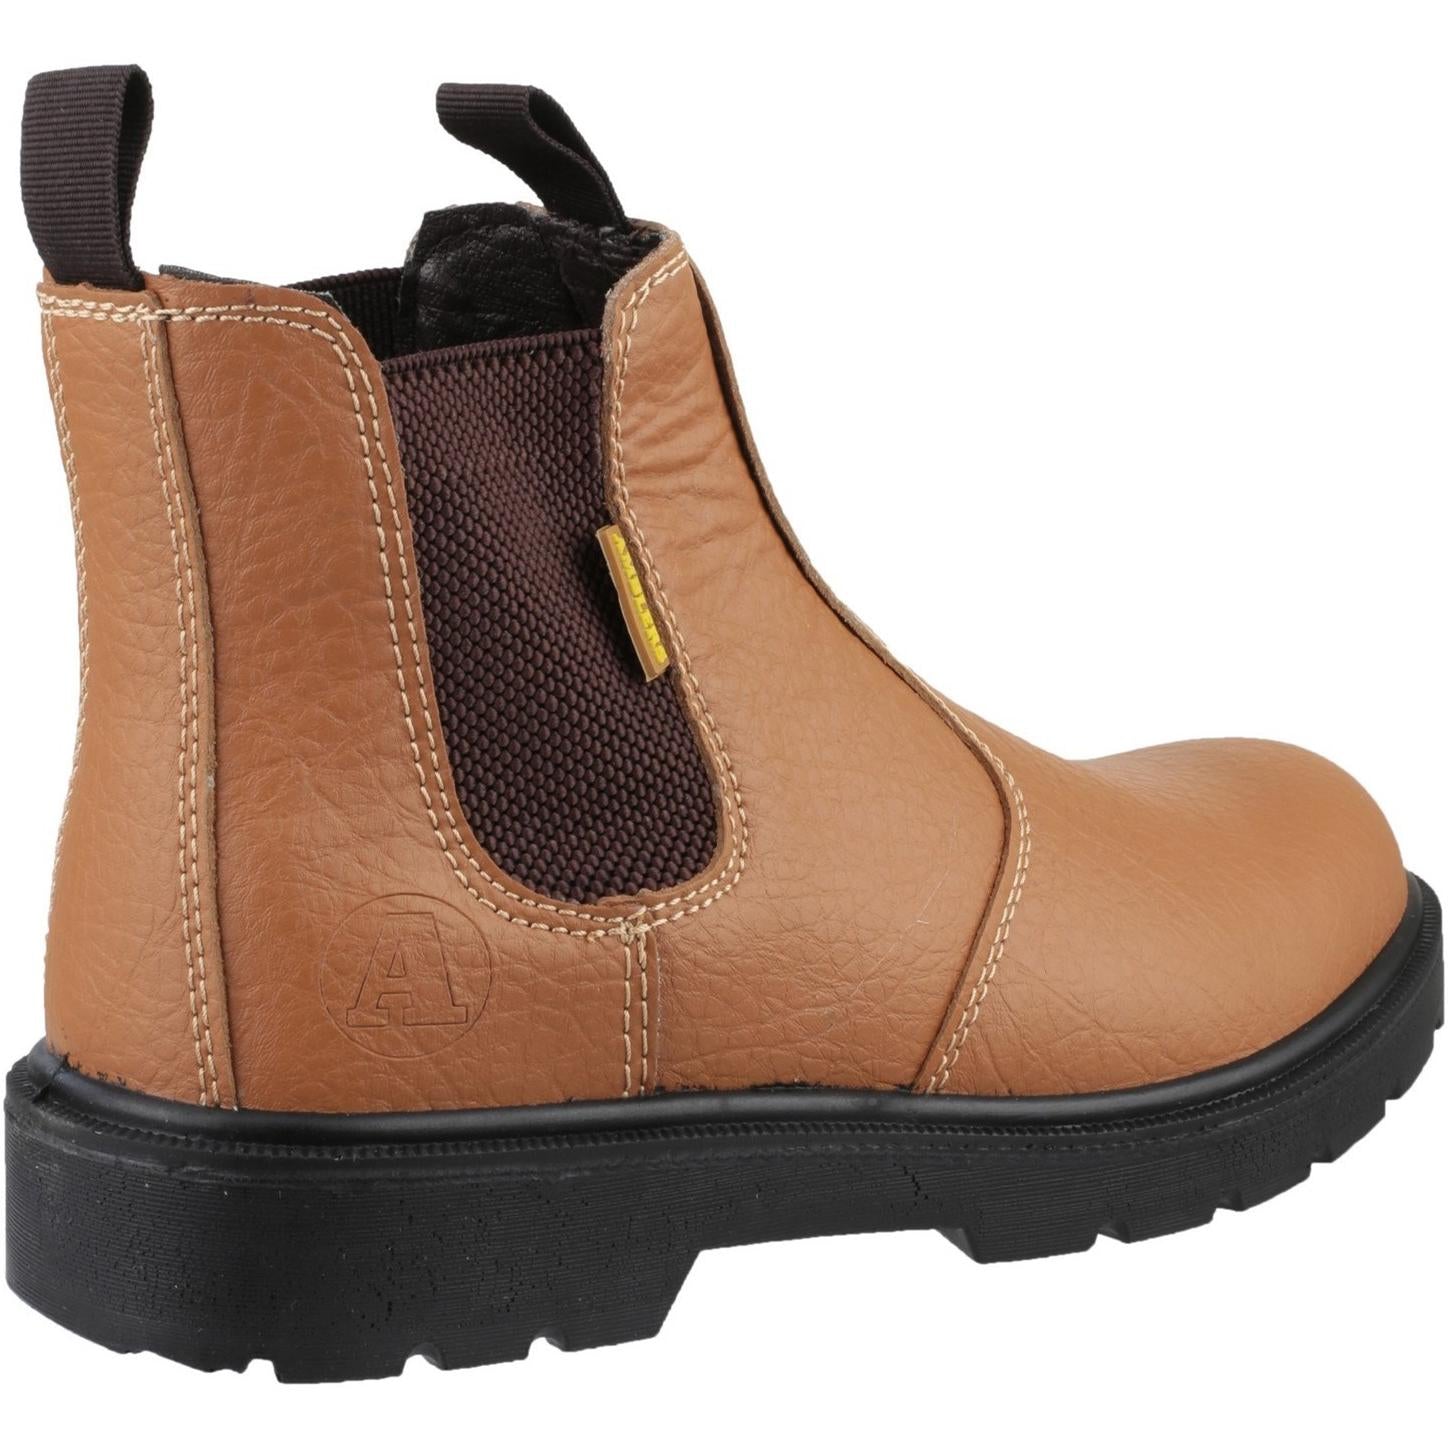 Amblers Safety FS115 Dual Density Pull on Chelsea Safety Boot